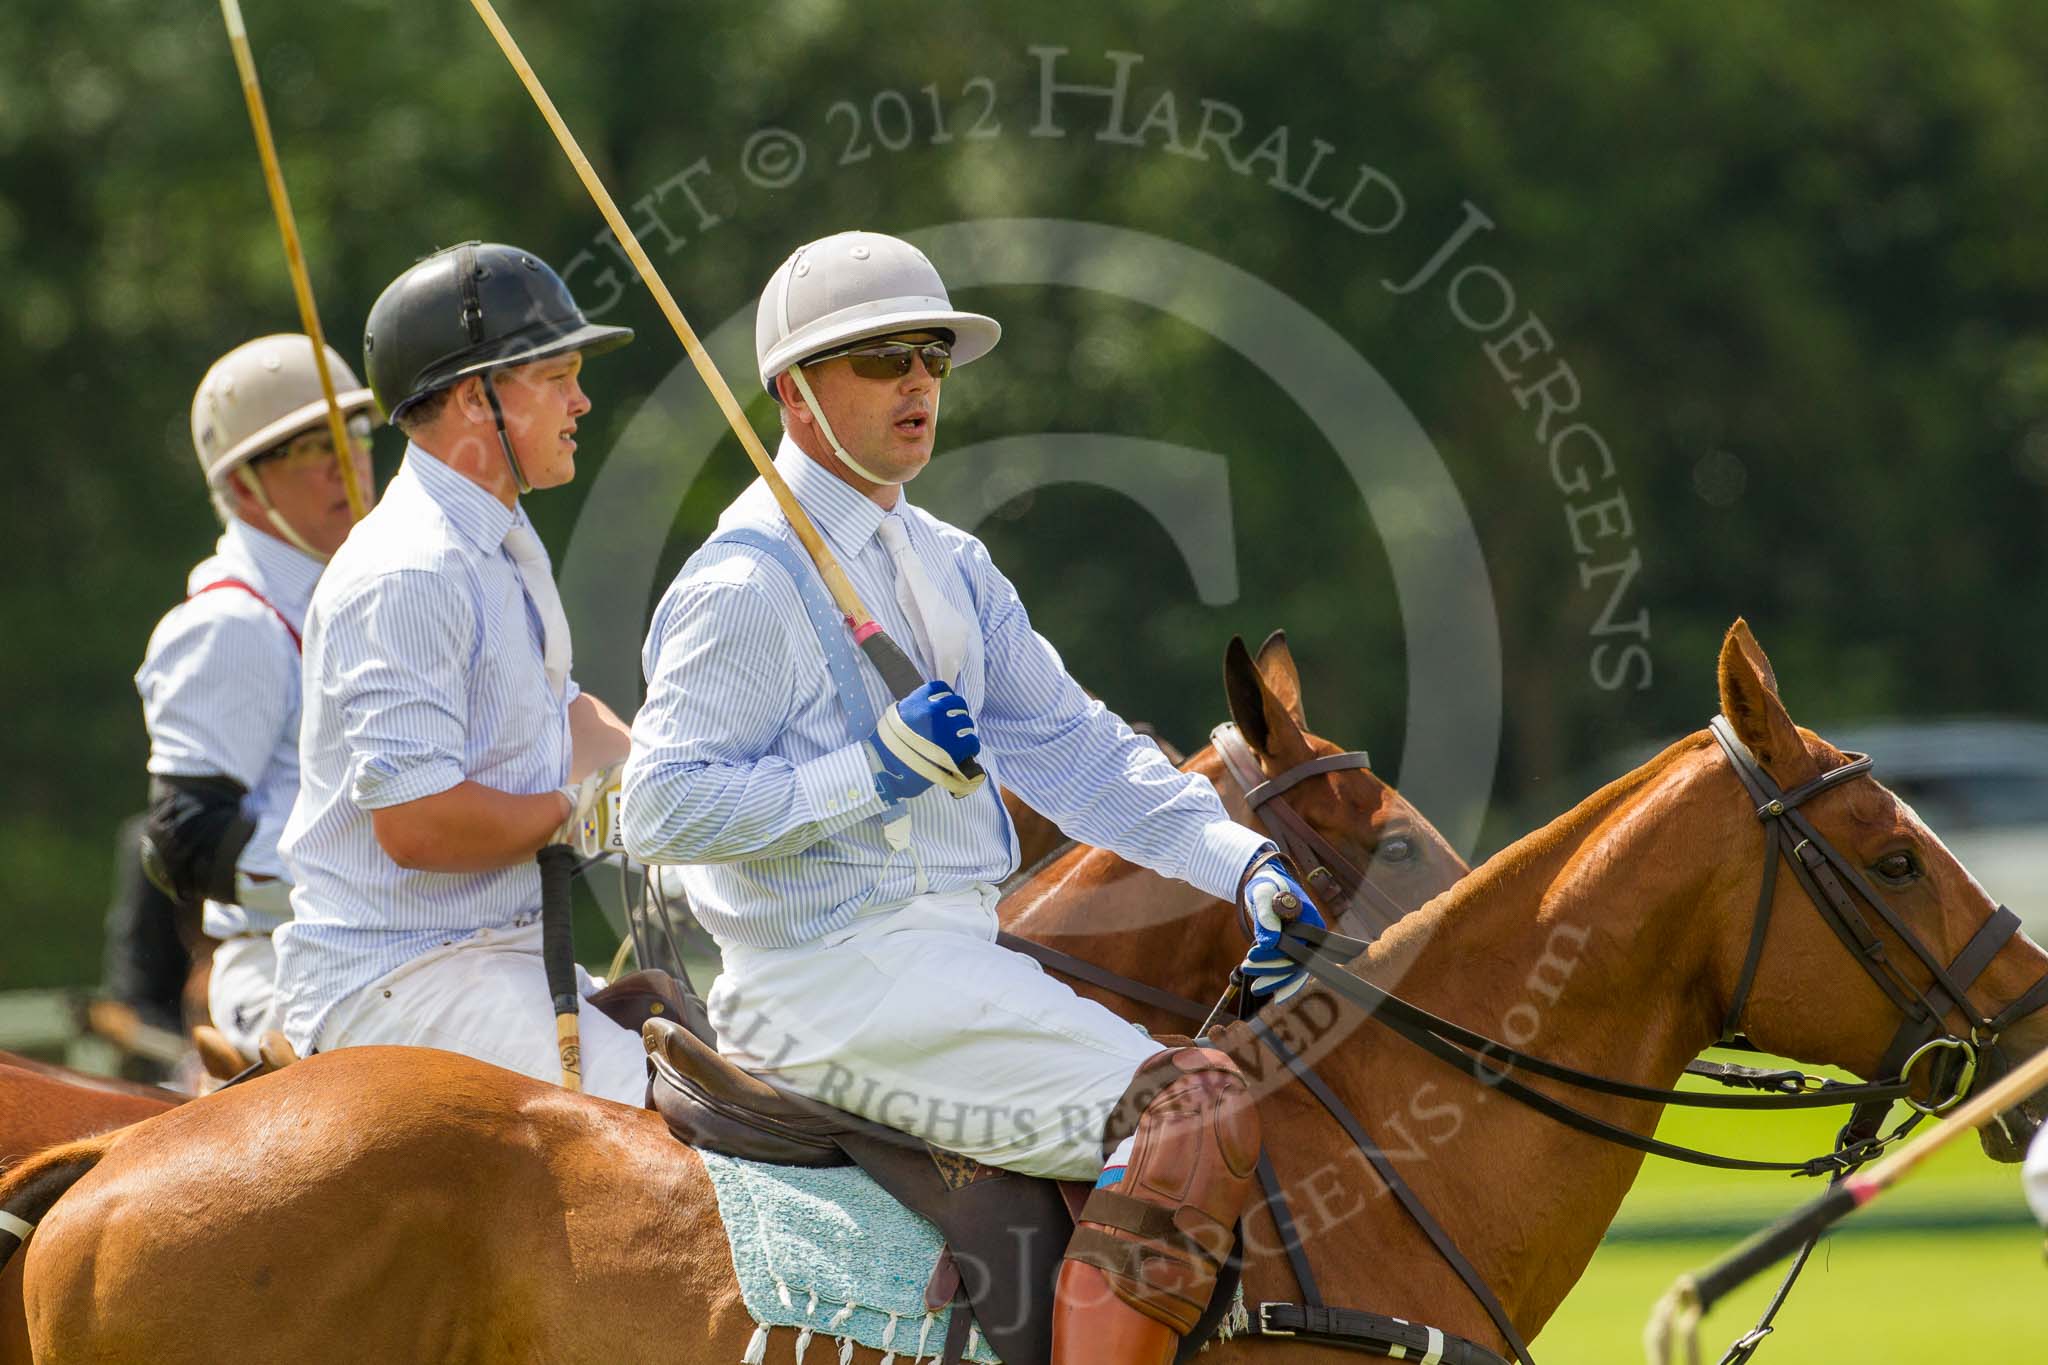 7th Heritage Polo Cup finals: Team La Mariposa Argentina in the FINAL, Polo Patron Timothy Rose..
Hurtwood Park Polo Club,
Ewhurst Green,
Surrey,
United Kingdom,
on 05 August 2012 at 13:18, image #12